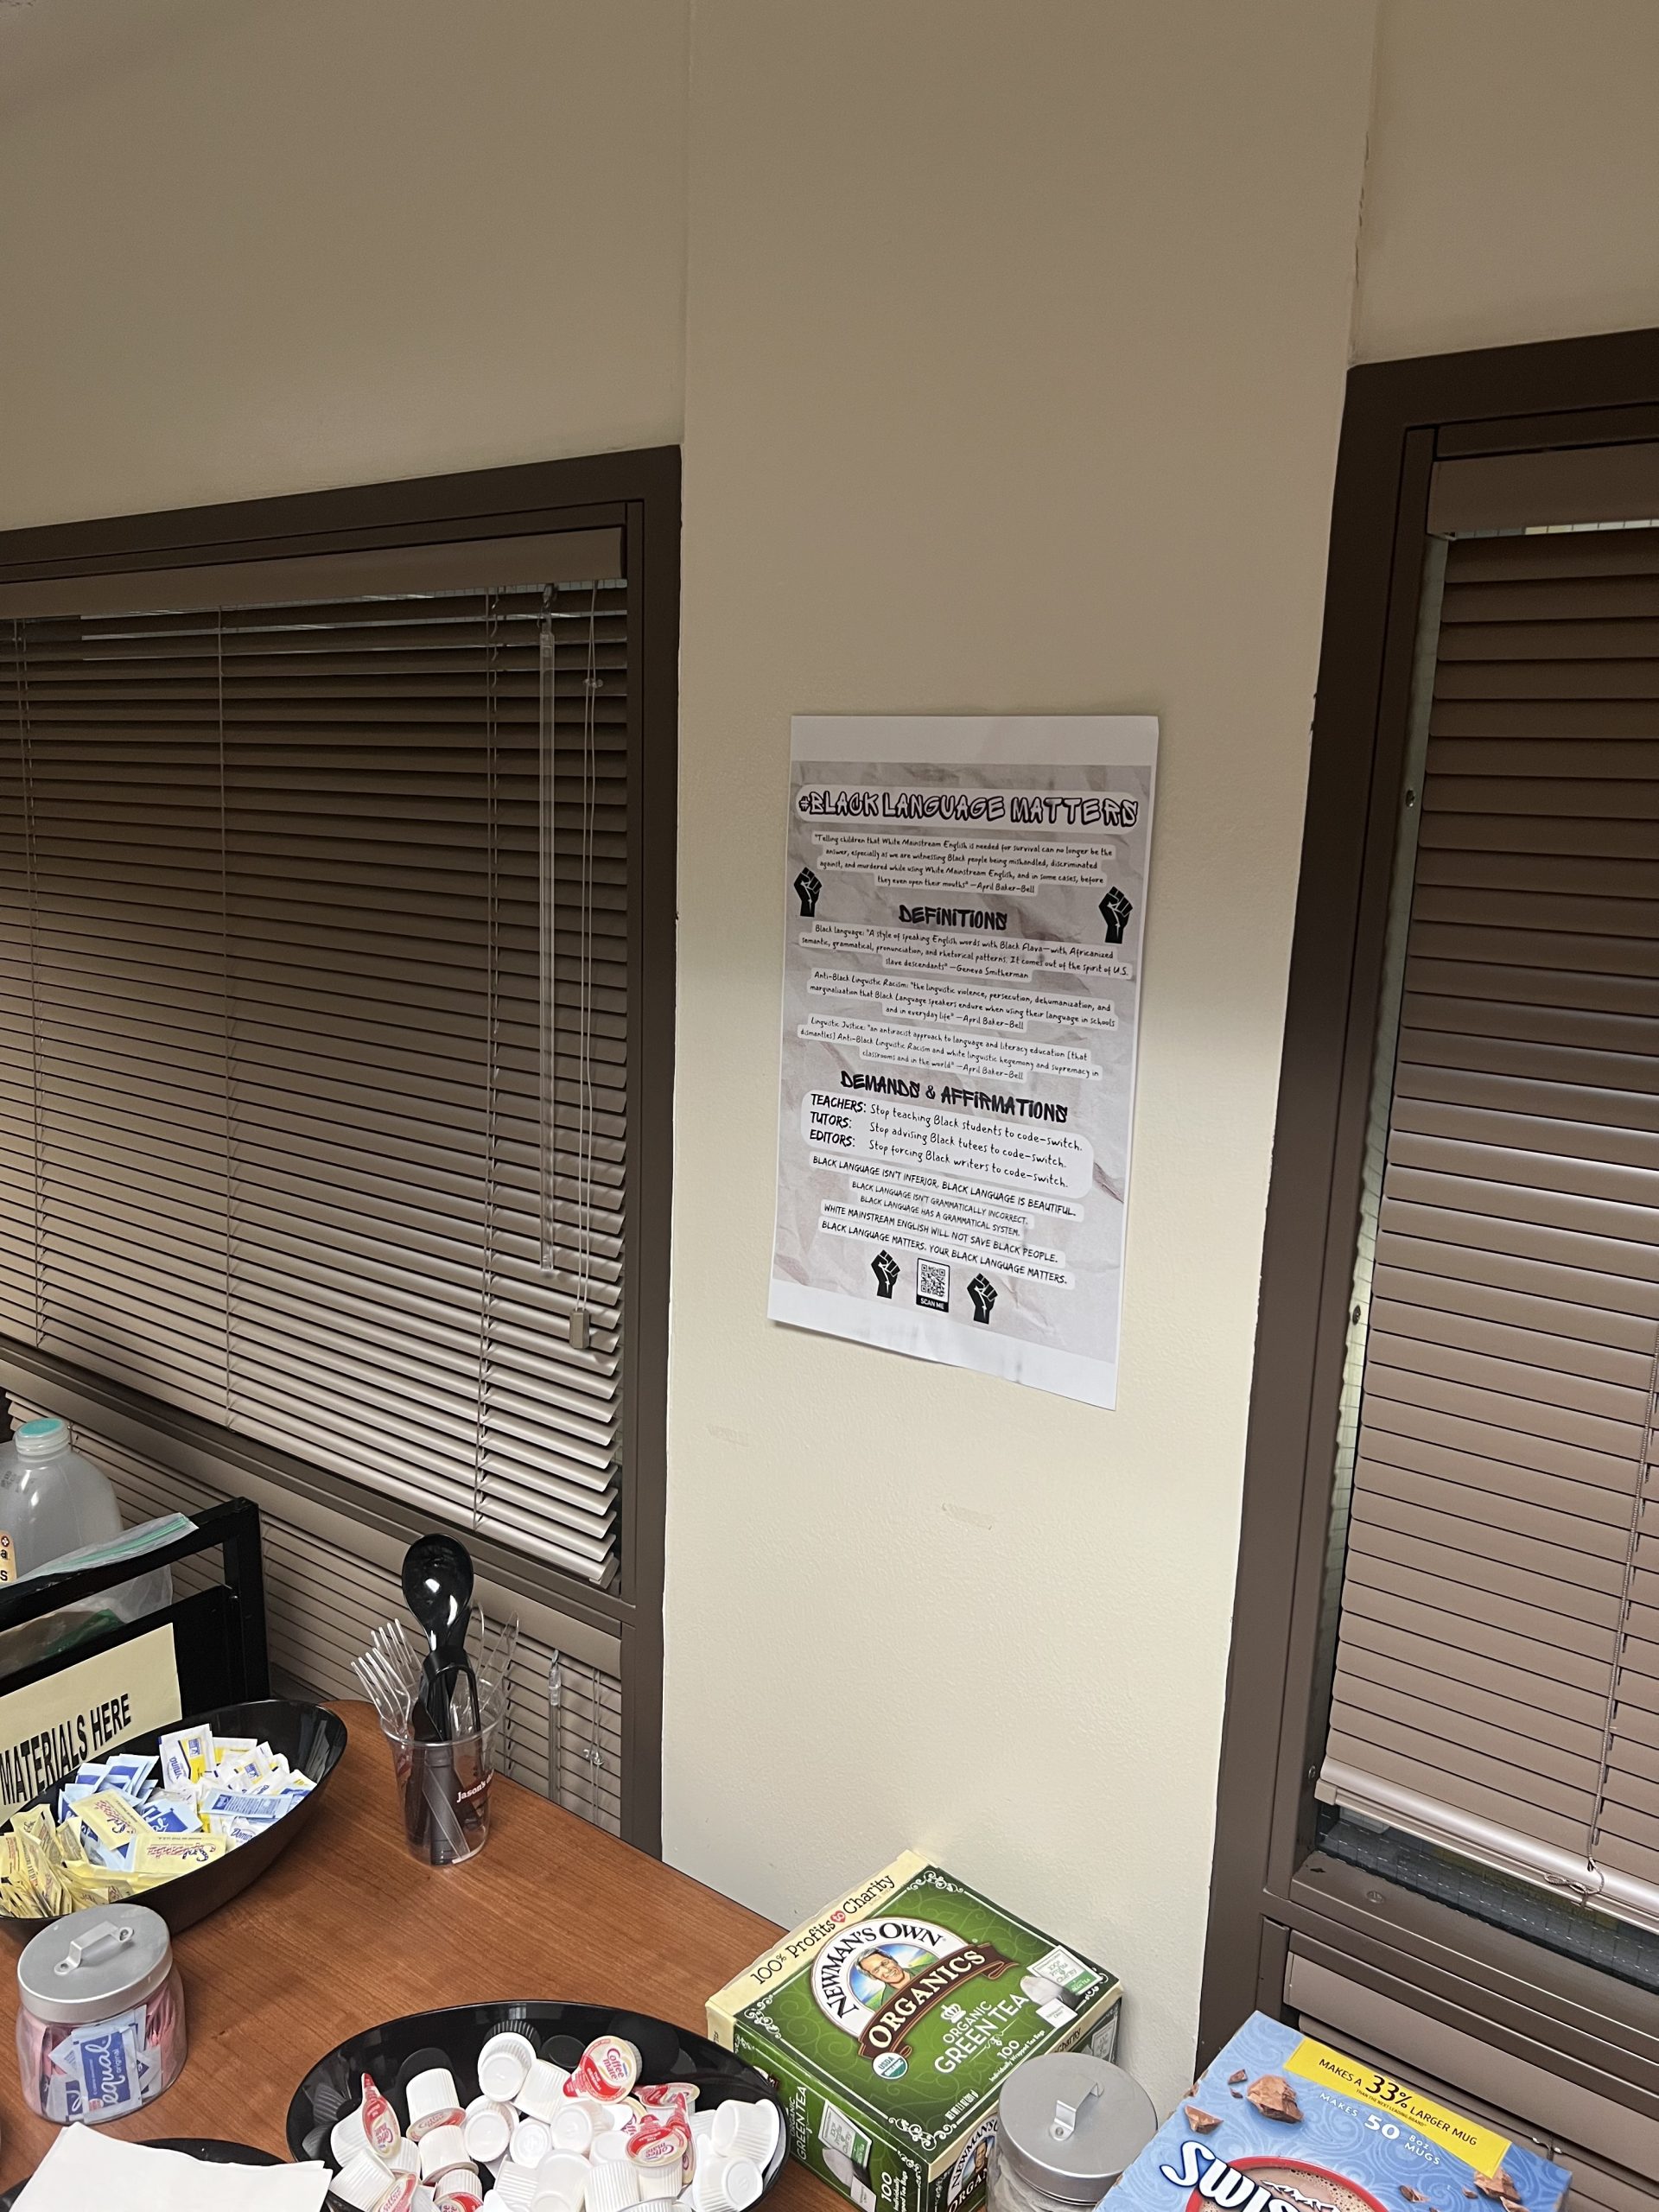 Figure 7: #BlackLanguageMatters poster taped to a wall in between two windows with brown blinds. In front of the poster is a table with various beverages.